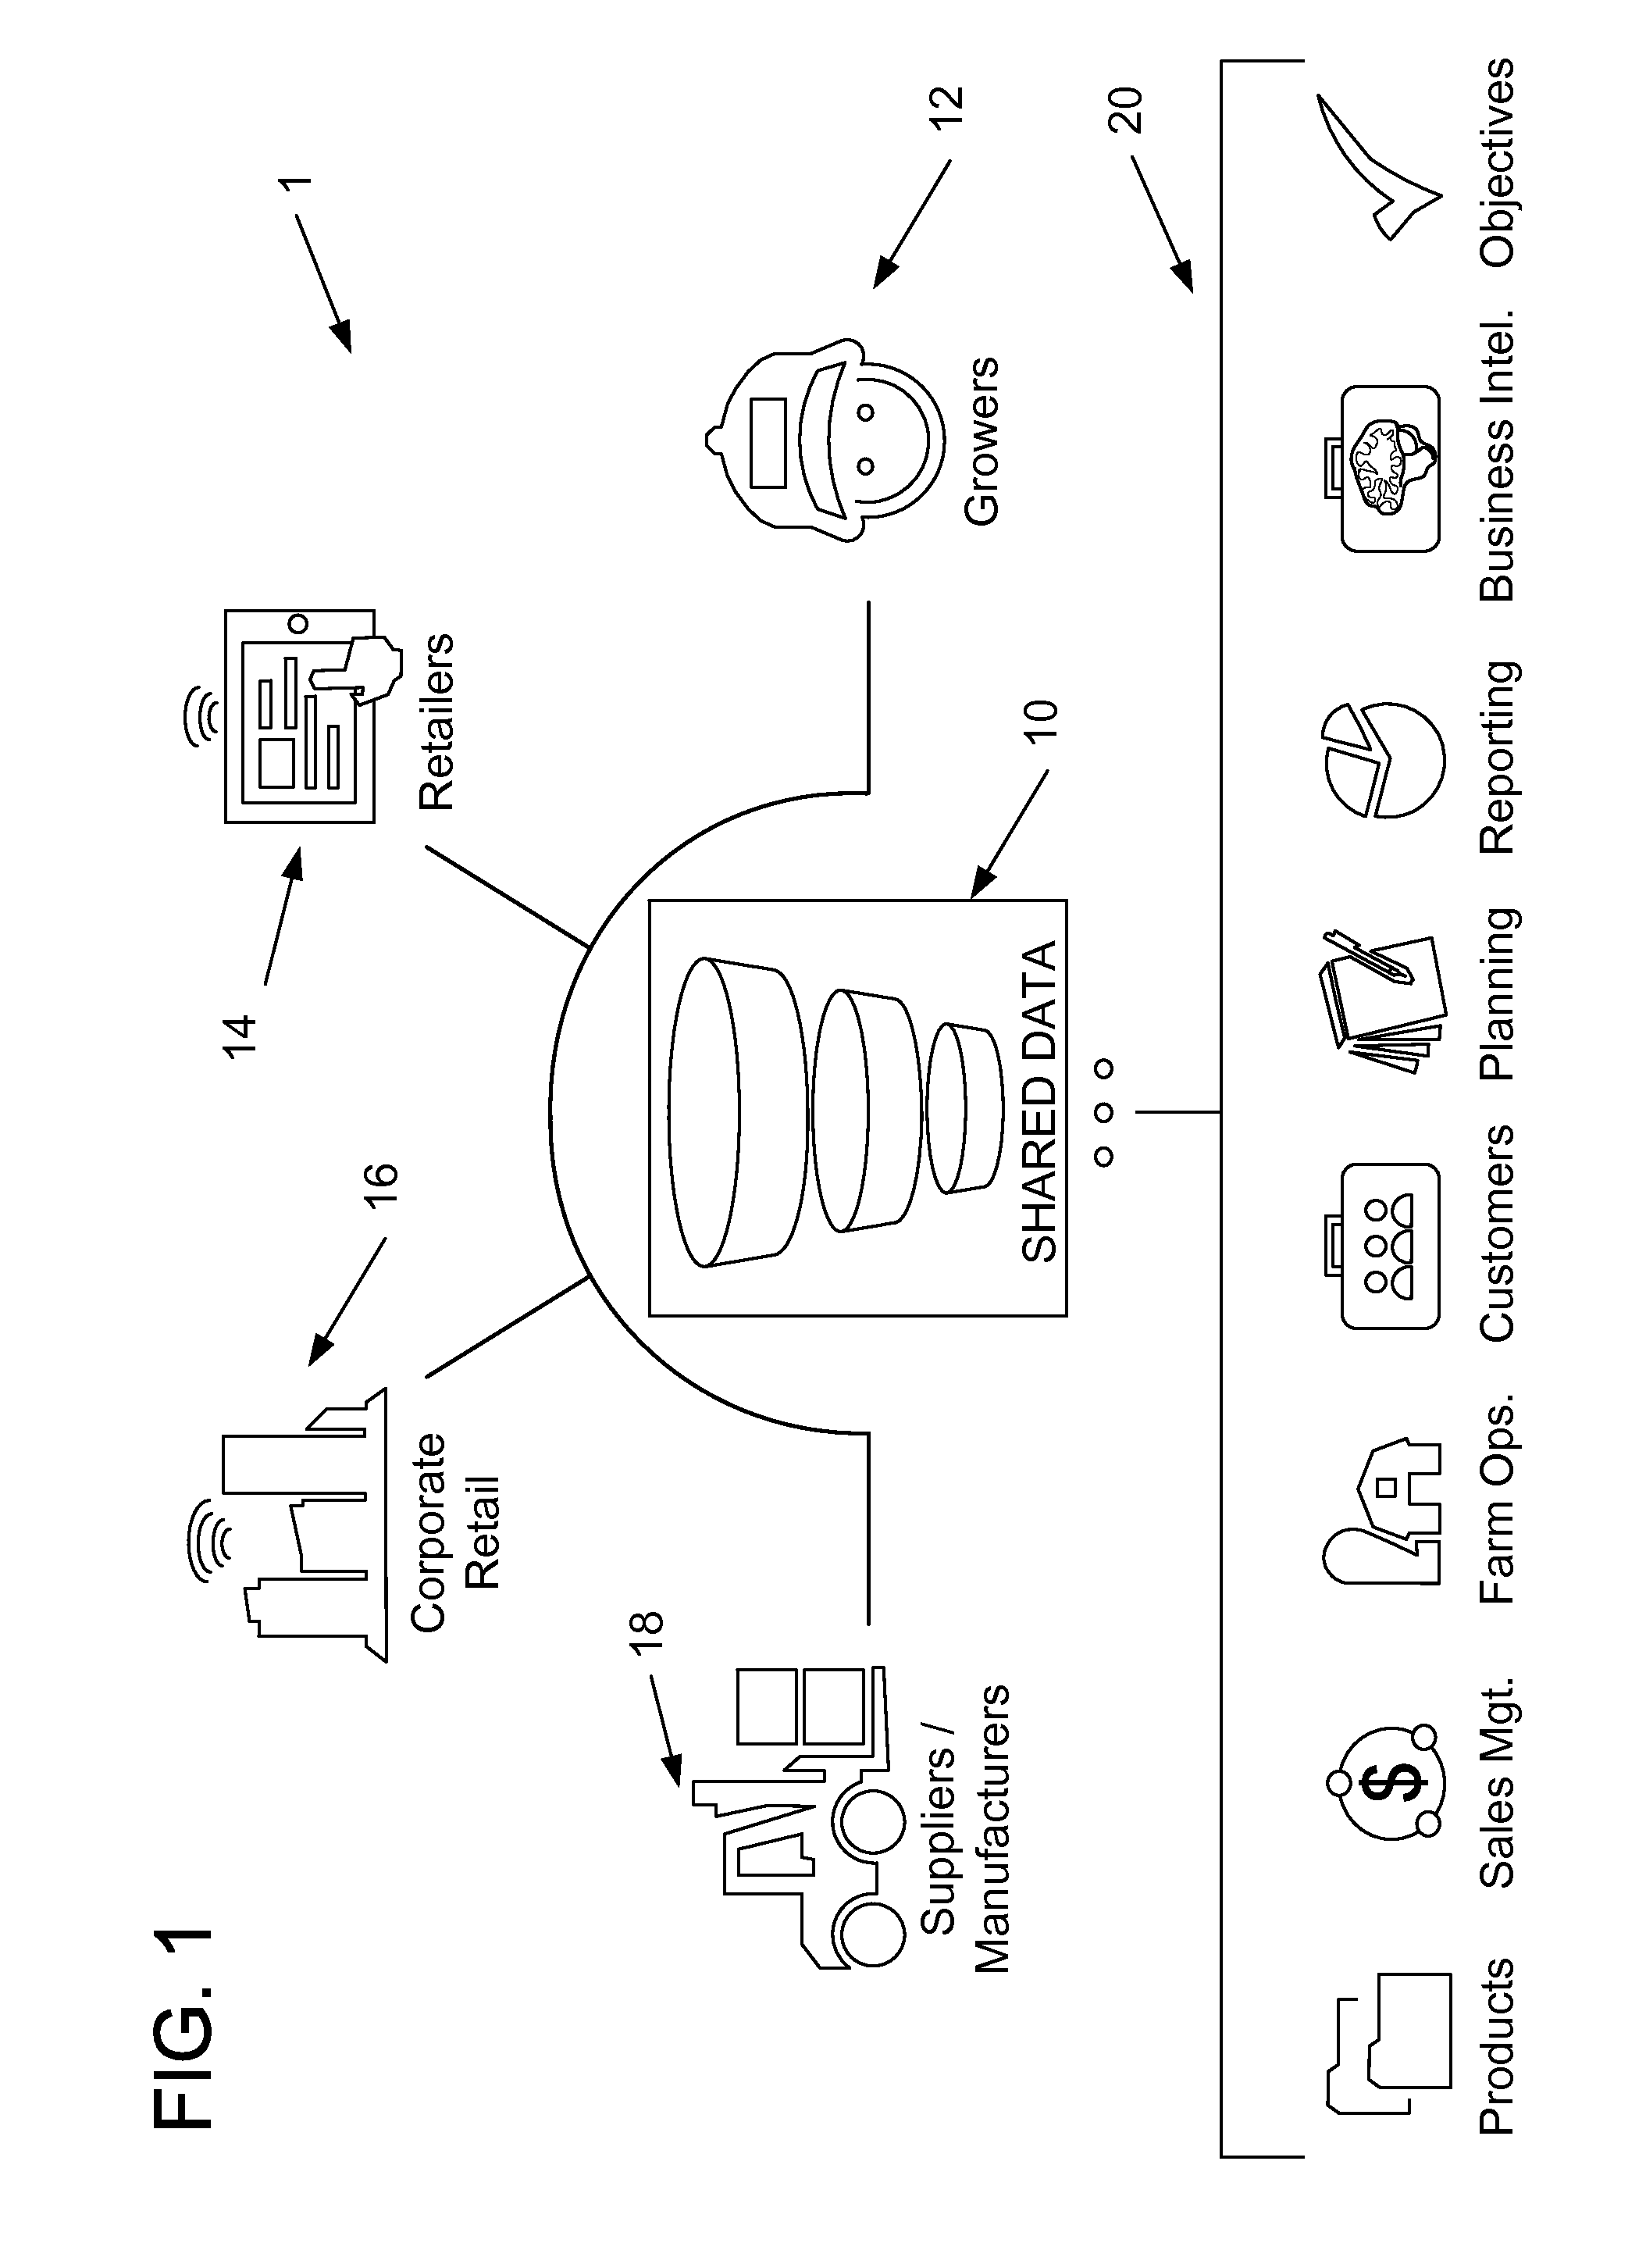 Systems and methods for enhanced use of data in agriculture management